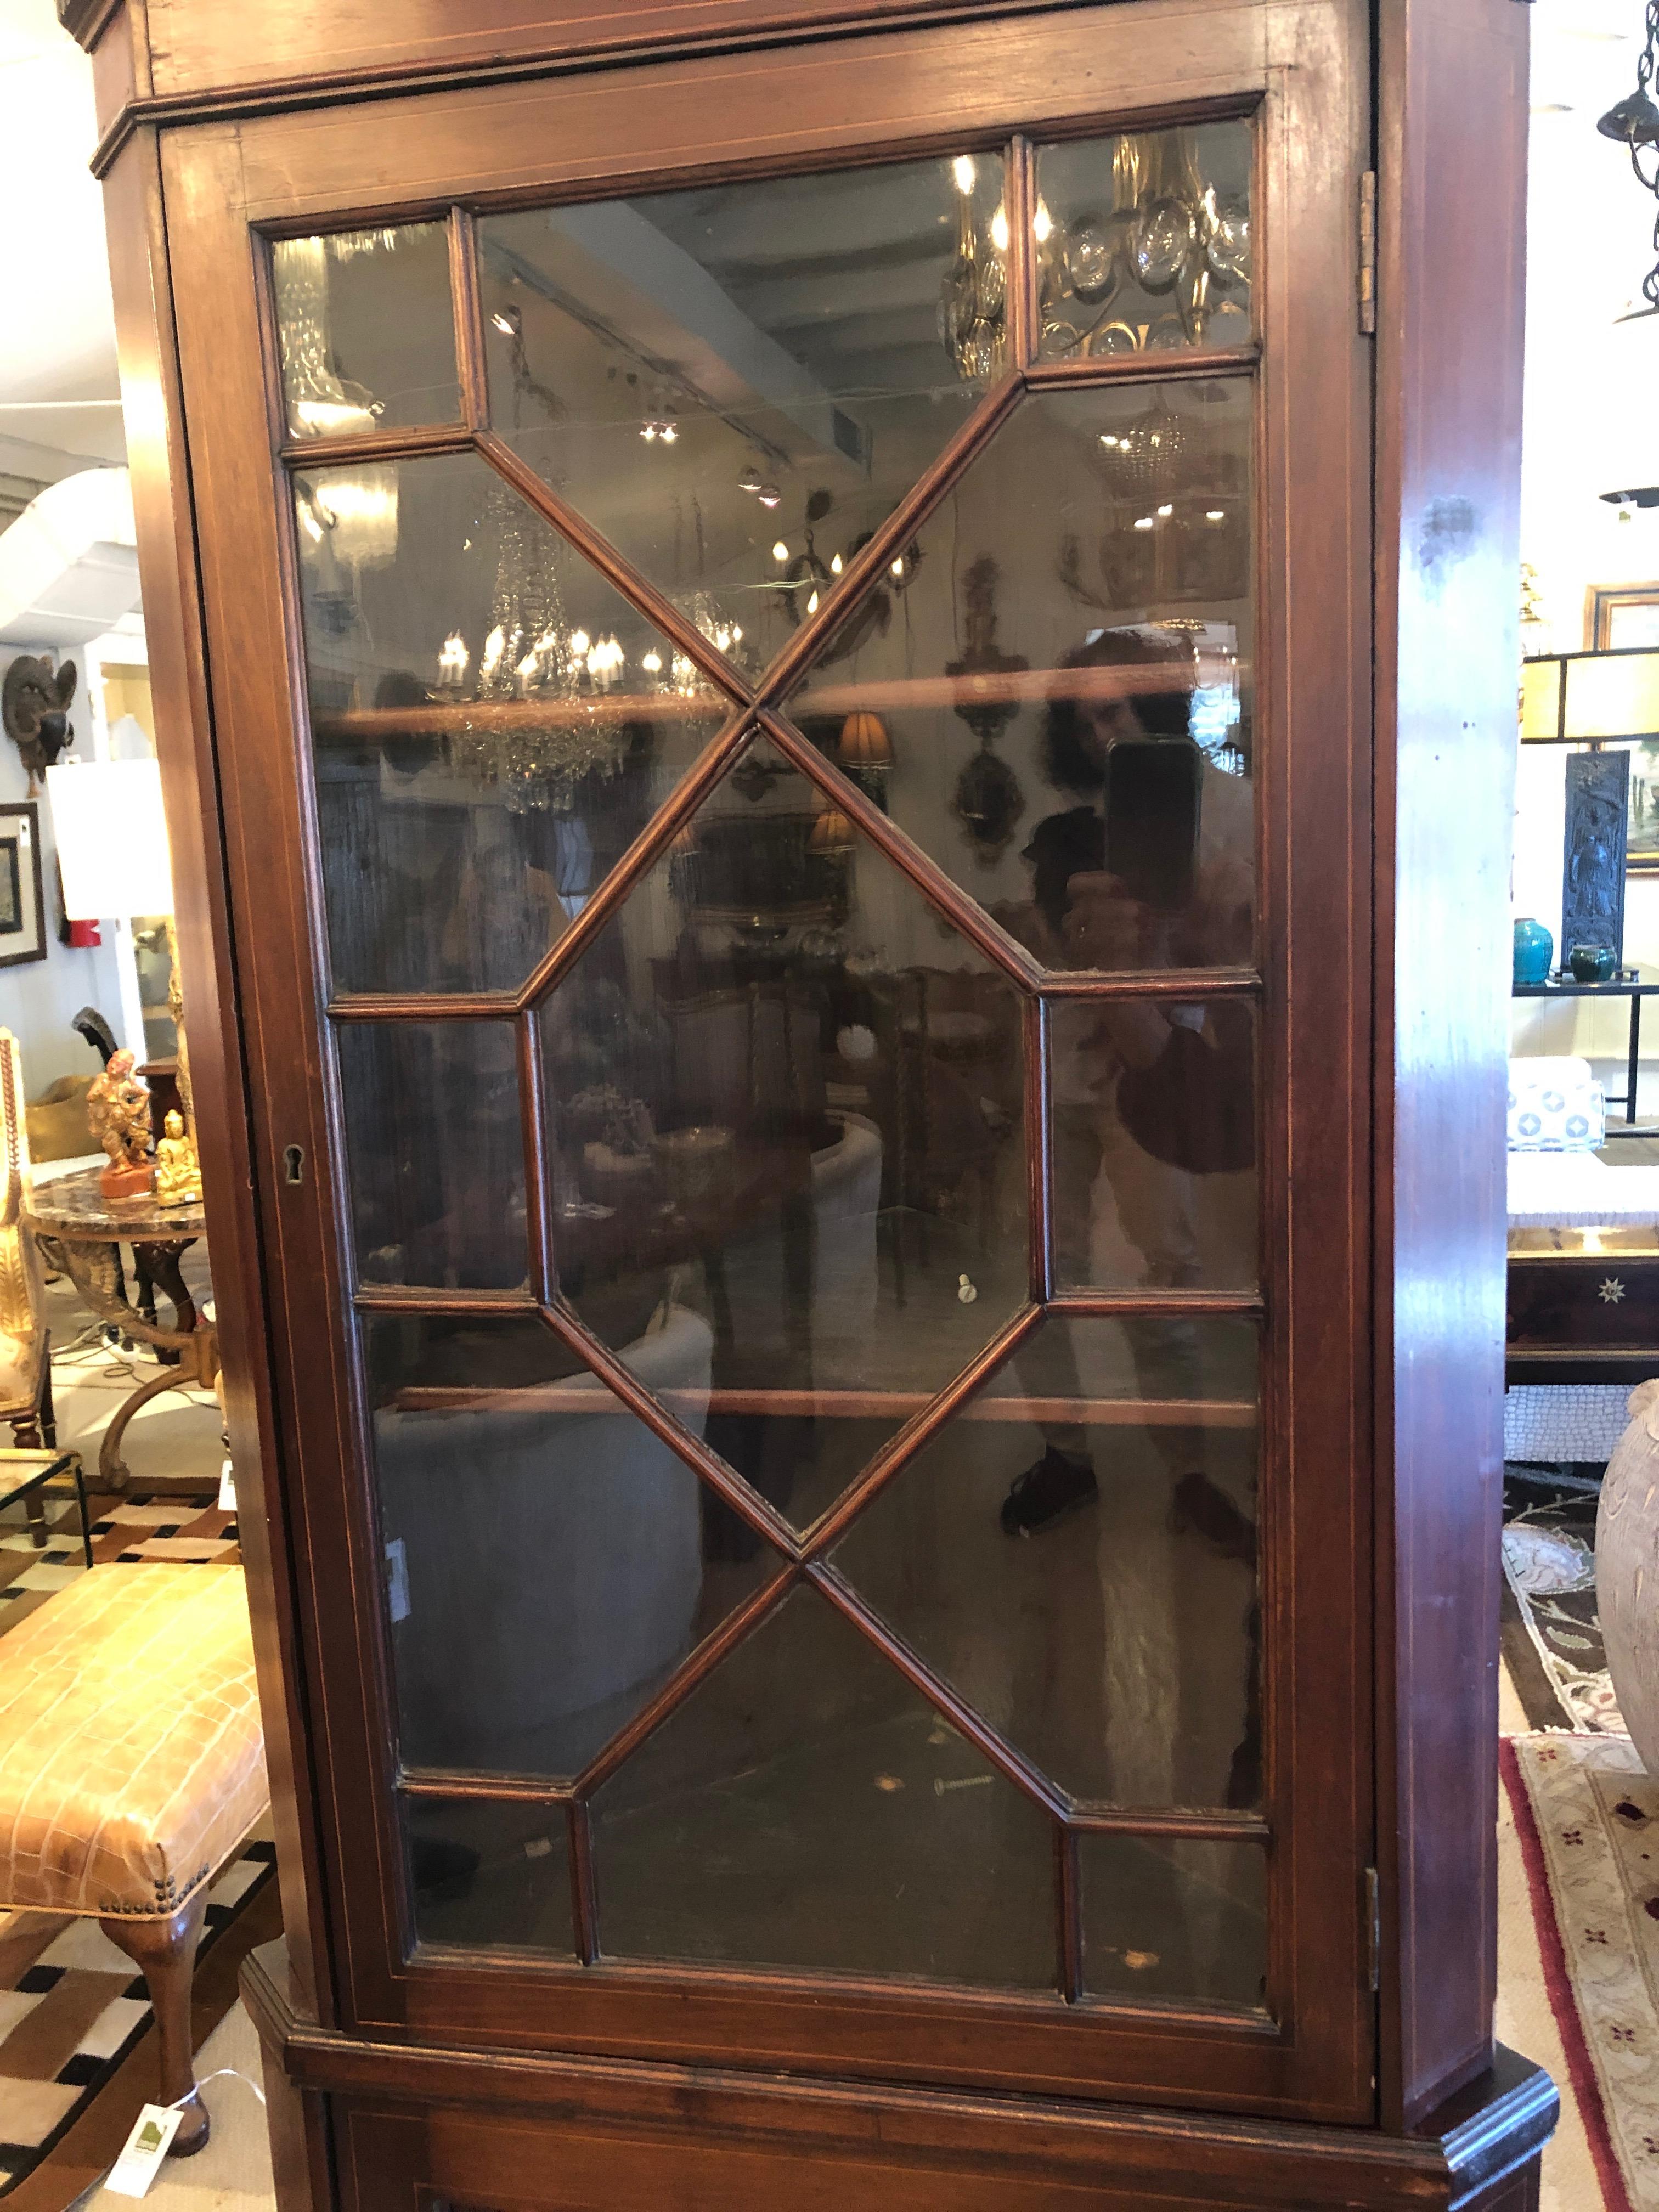 Very elegant dark mahogany Chippendale style corner cabinet having pretty satinwood inlay seashell on lower panel door and original glass in the top door. Both doors open to storage, 2 shelves on top, 1 on the bottom.
Two pieces for easy